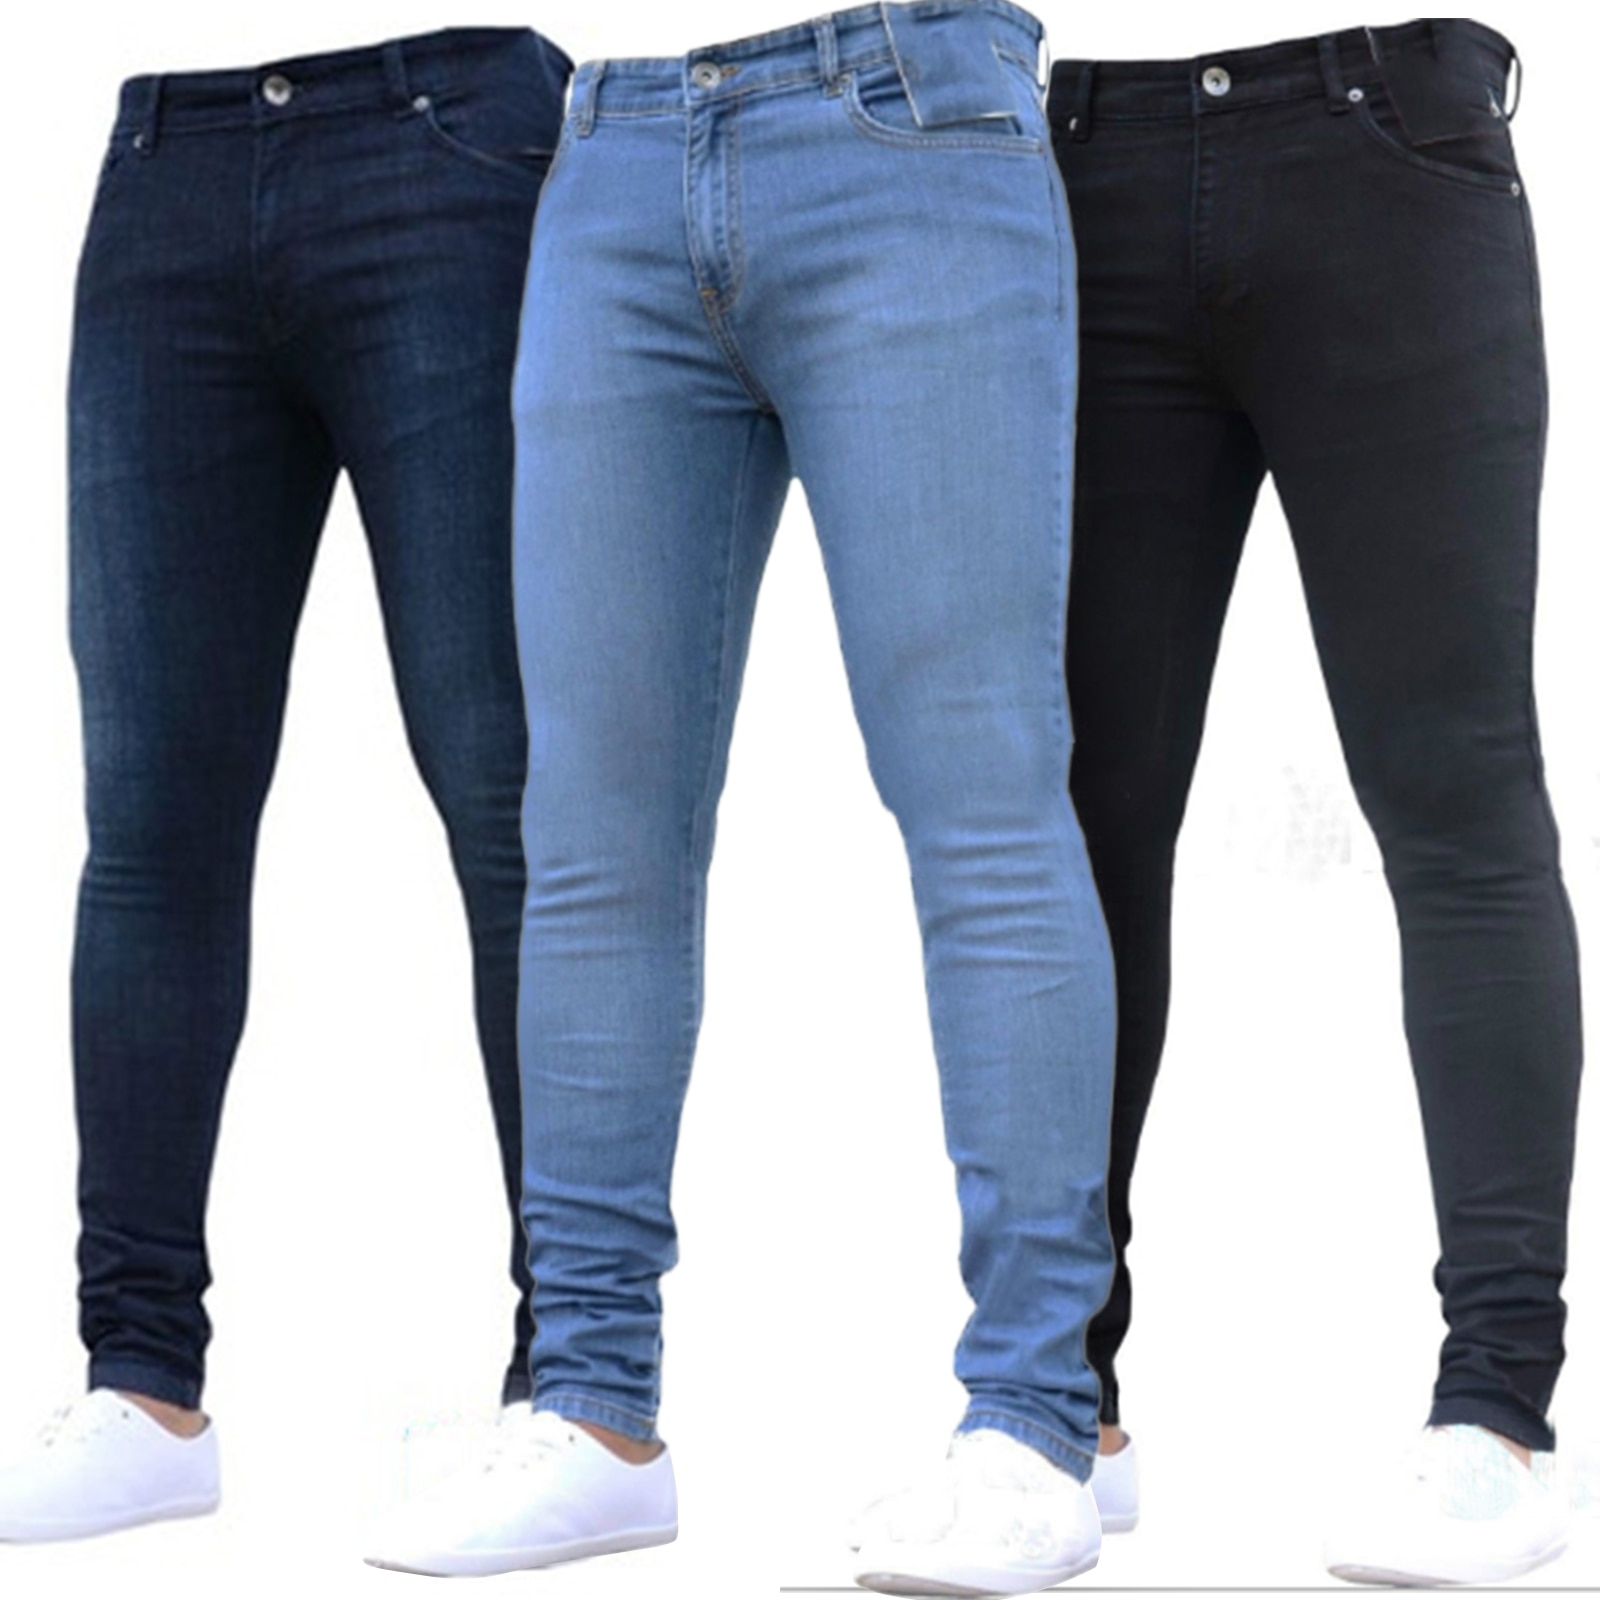 shop with crypto buy Mens Pants High Waist Zipper Stretch Jeans Casual Slim Trousers Male Plus Size Pencil Pants Denim Skinny Jeans for Men pay with bitcoin